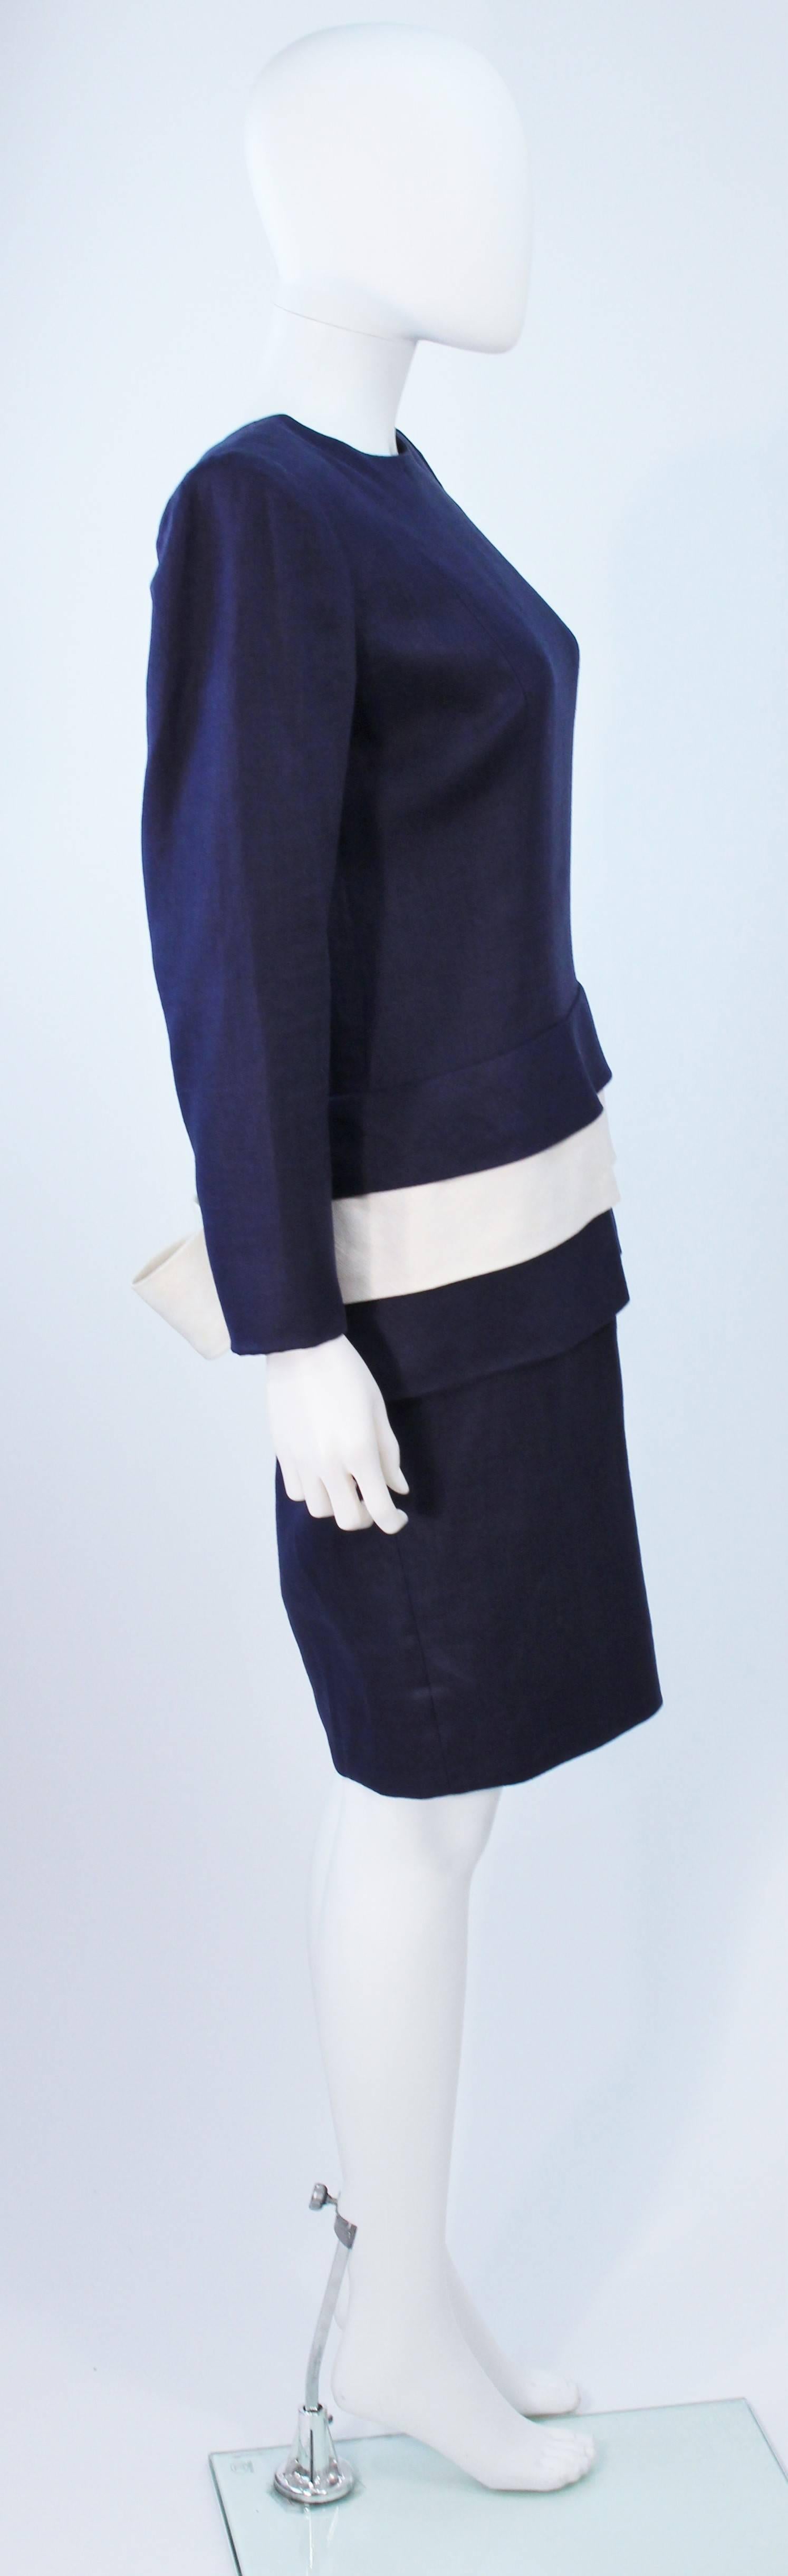 GIVENCHY COUTURE Navy Linen Color Block Dress with Bow Size 6 1